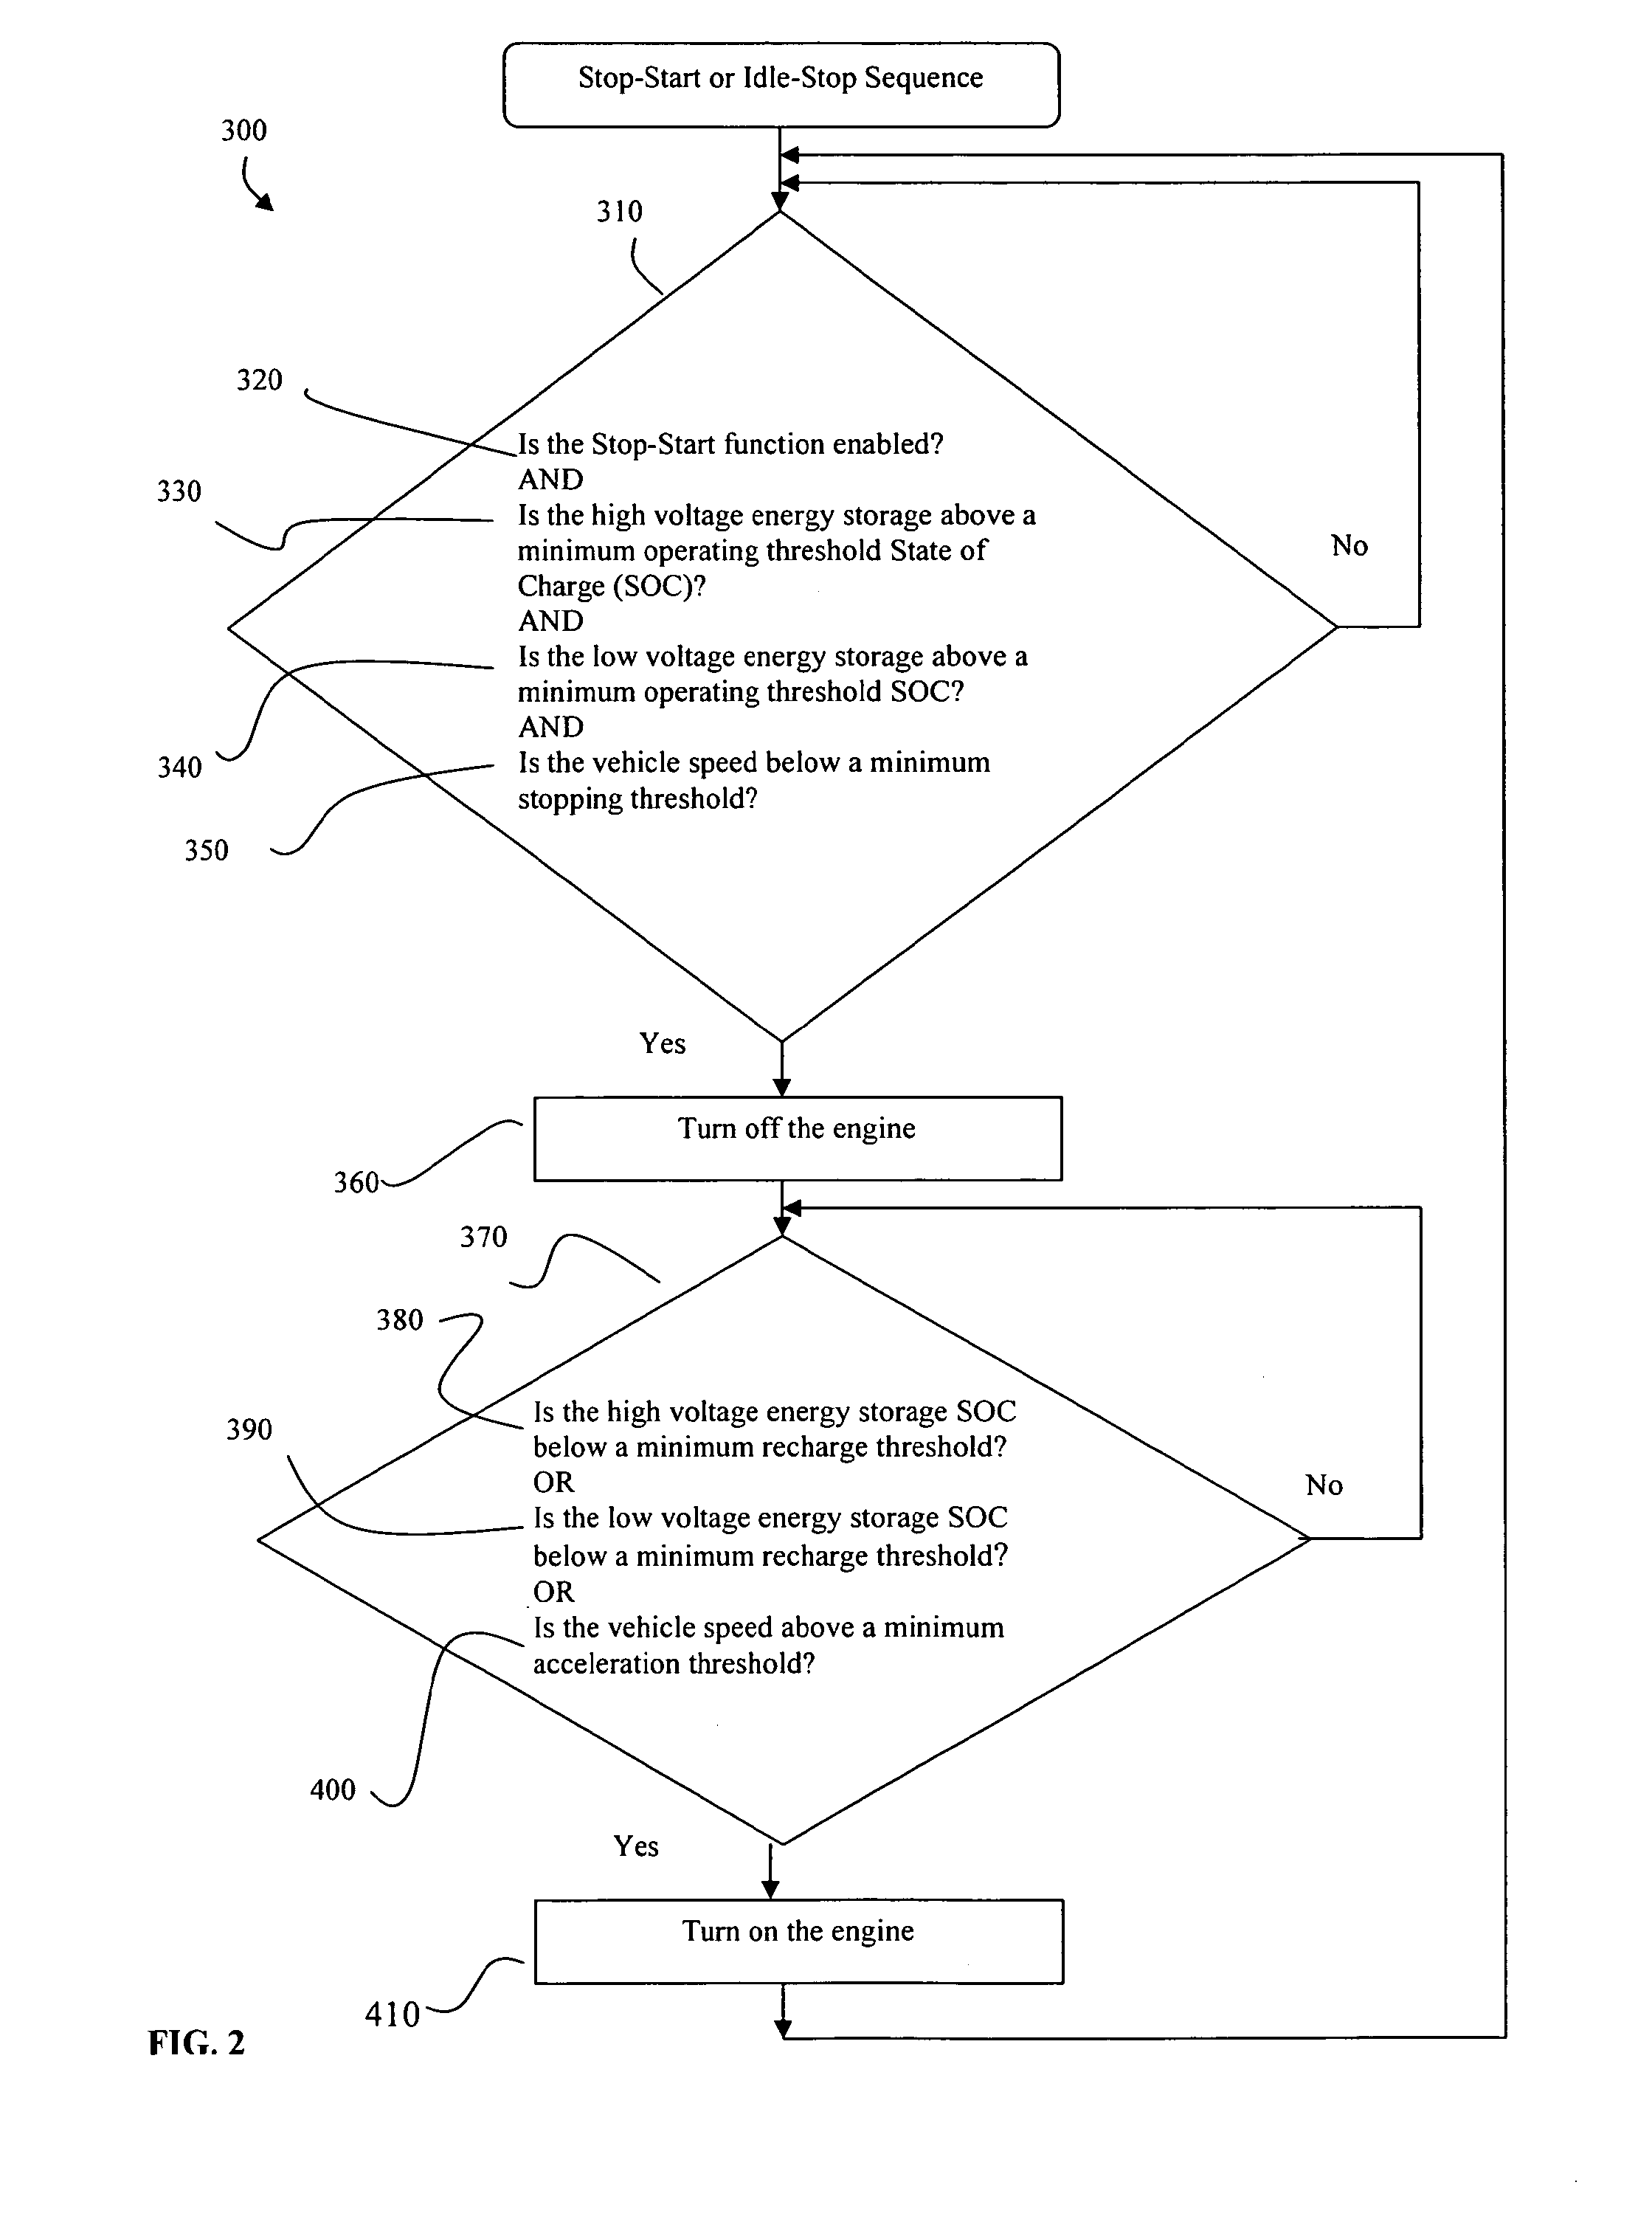 Method of Controlling Engine Stop-Start Operation for Heavy-Duty Hybrid-Electric Vehicles